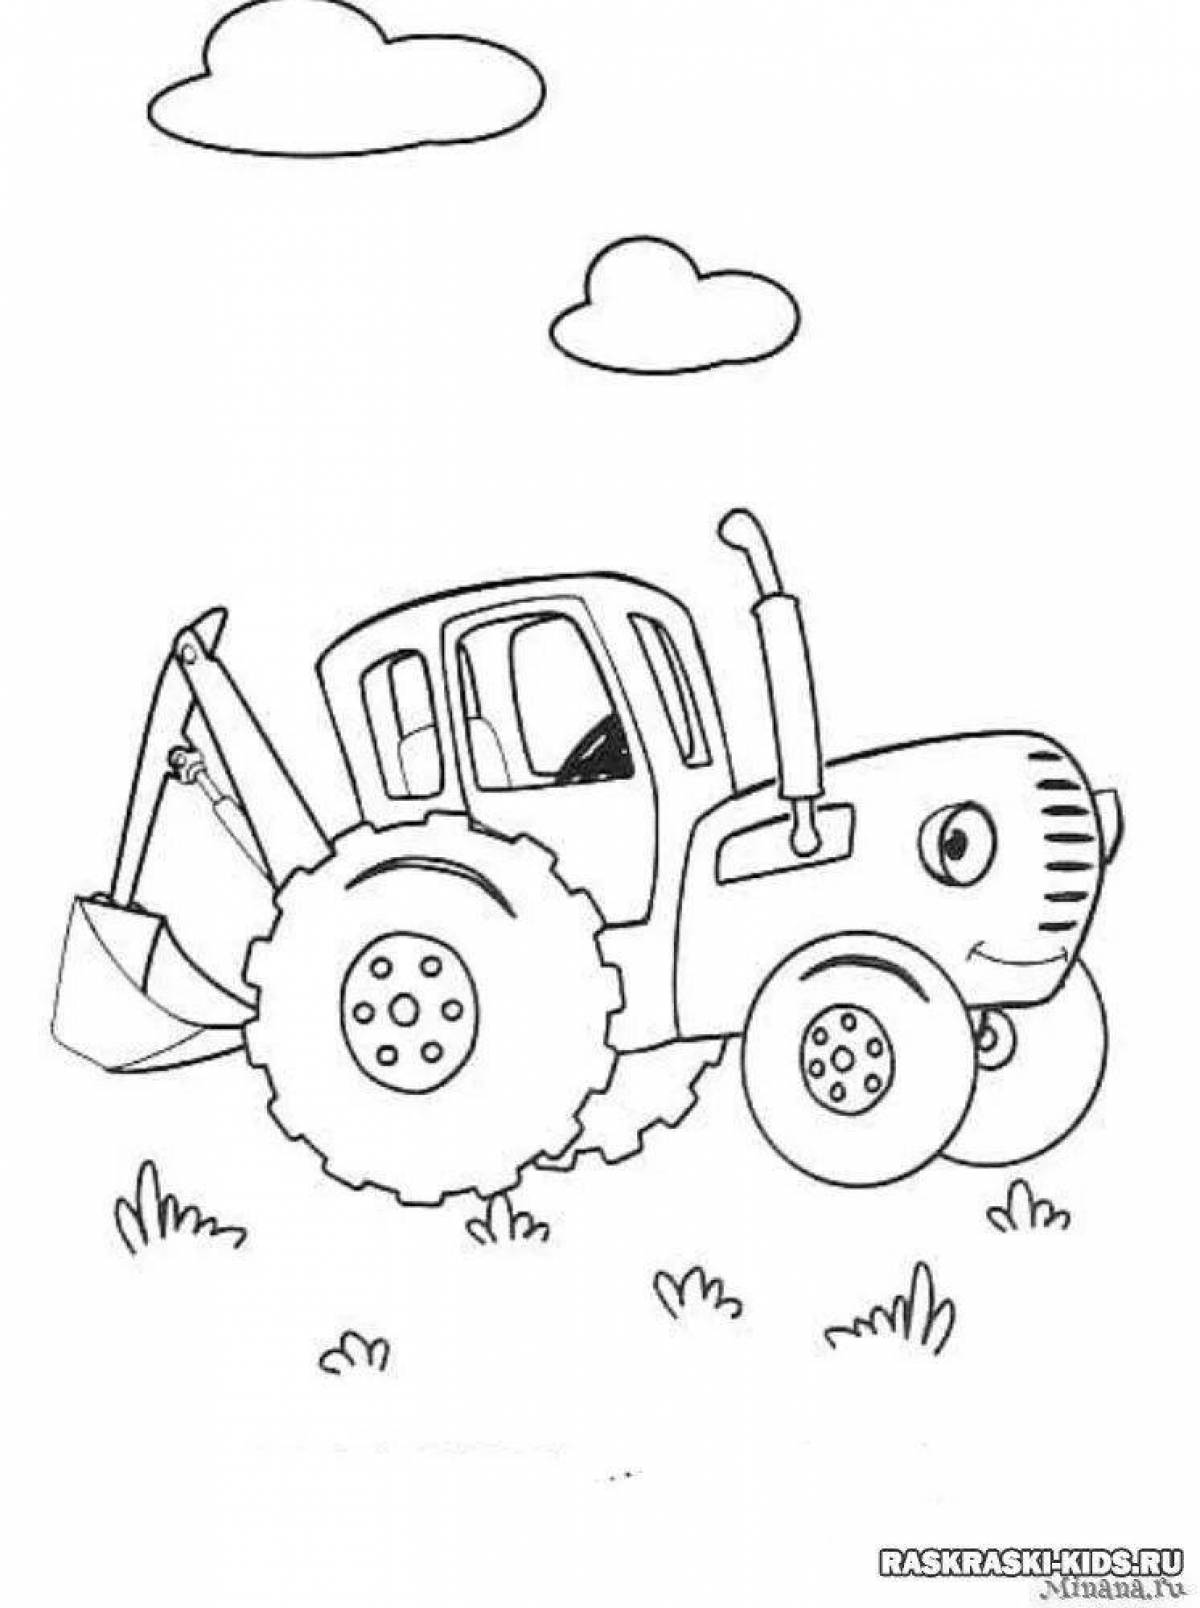 Impressive blue tractor coloring page